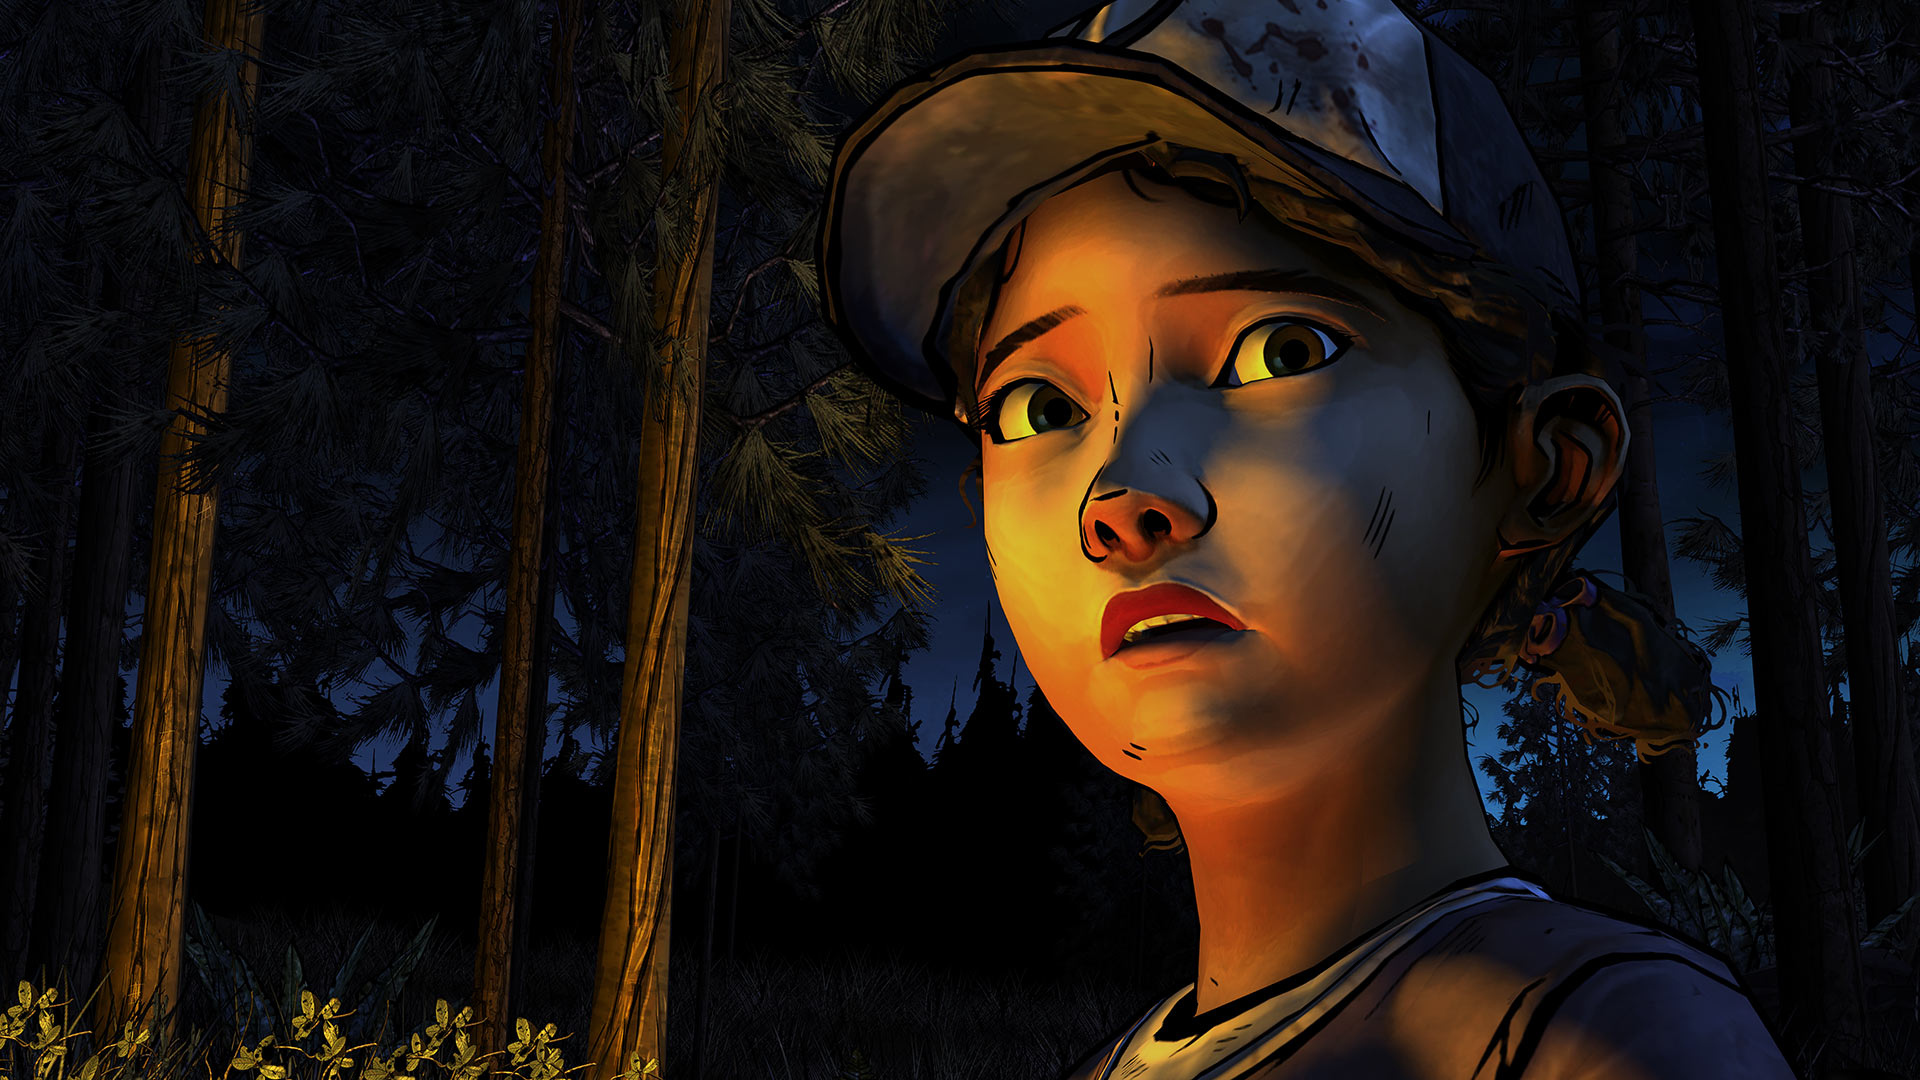 We Re Getting More Clementine In The Walking Dead Game